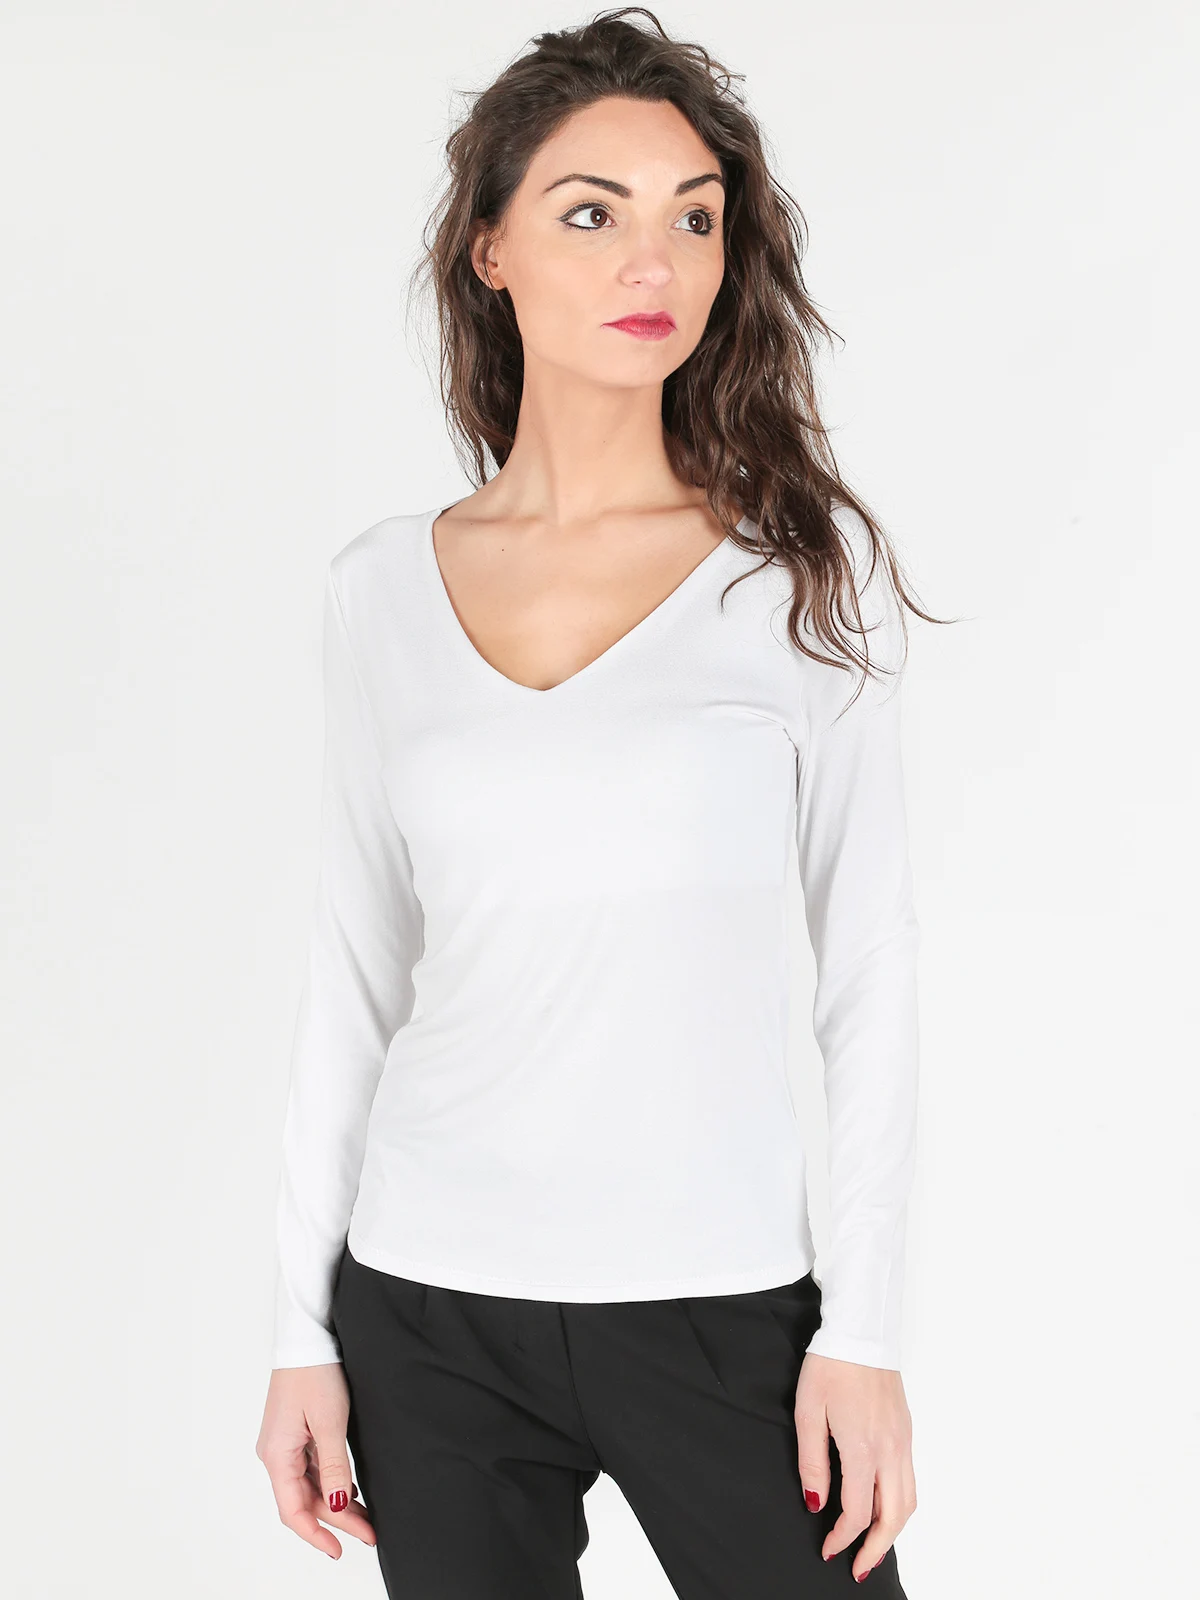 Classic matching slim V neck bottoming shirt-in T-Shirts from Women's ...